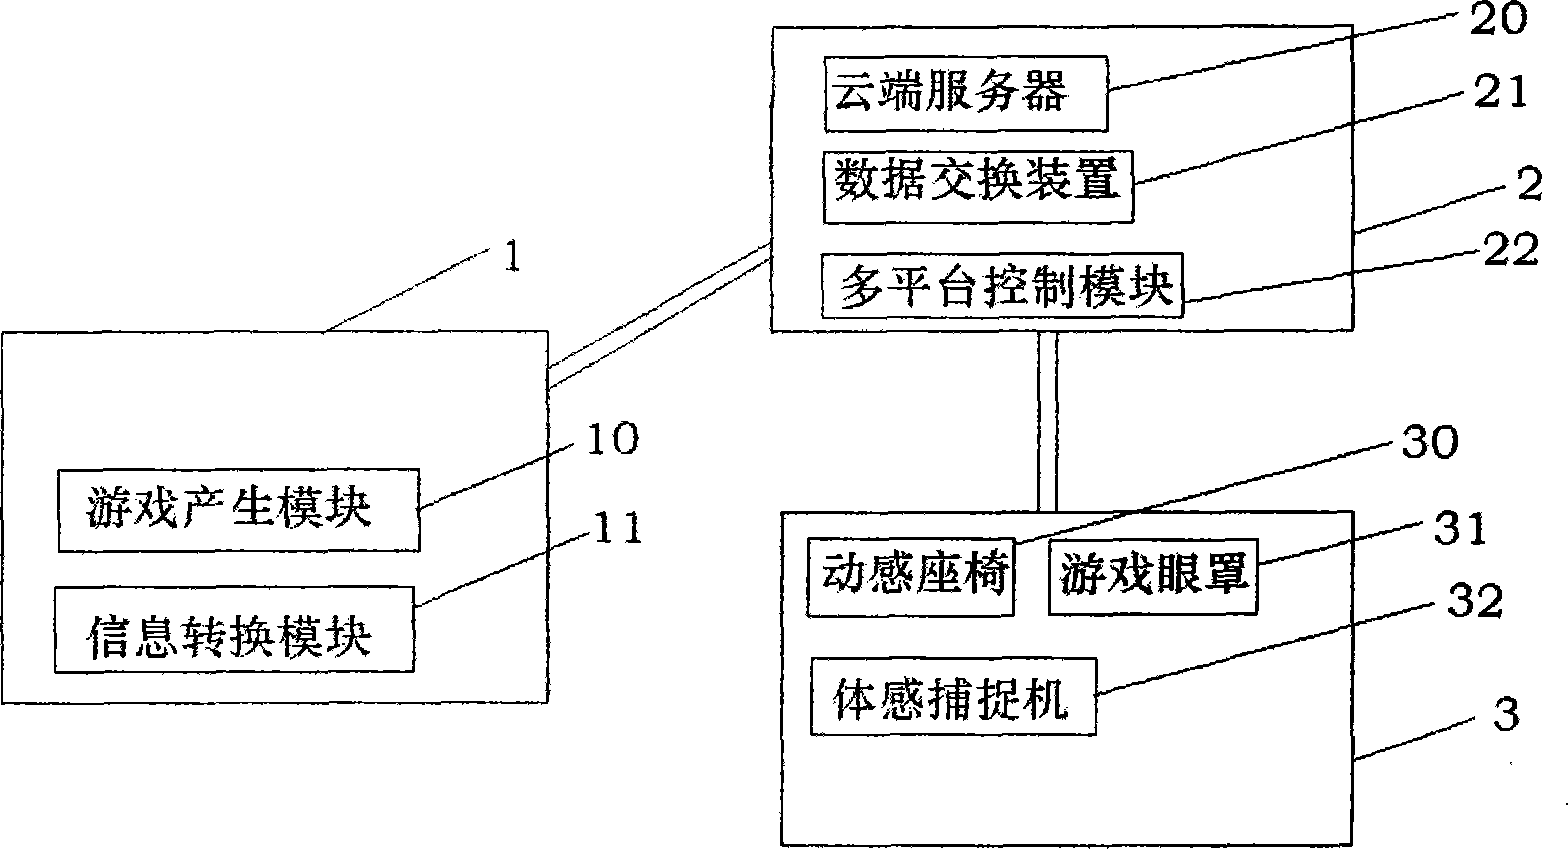 Three-dimensional simulation game scene experience system